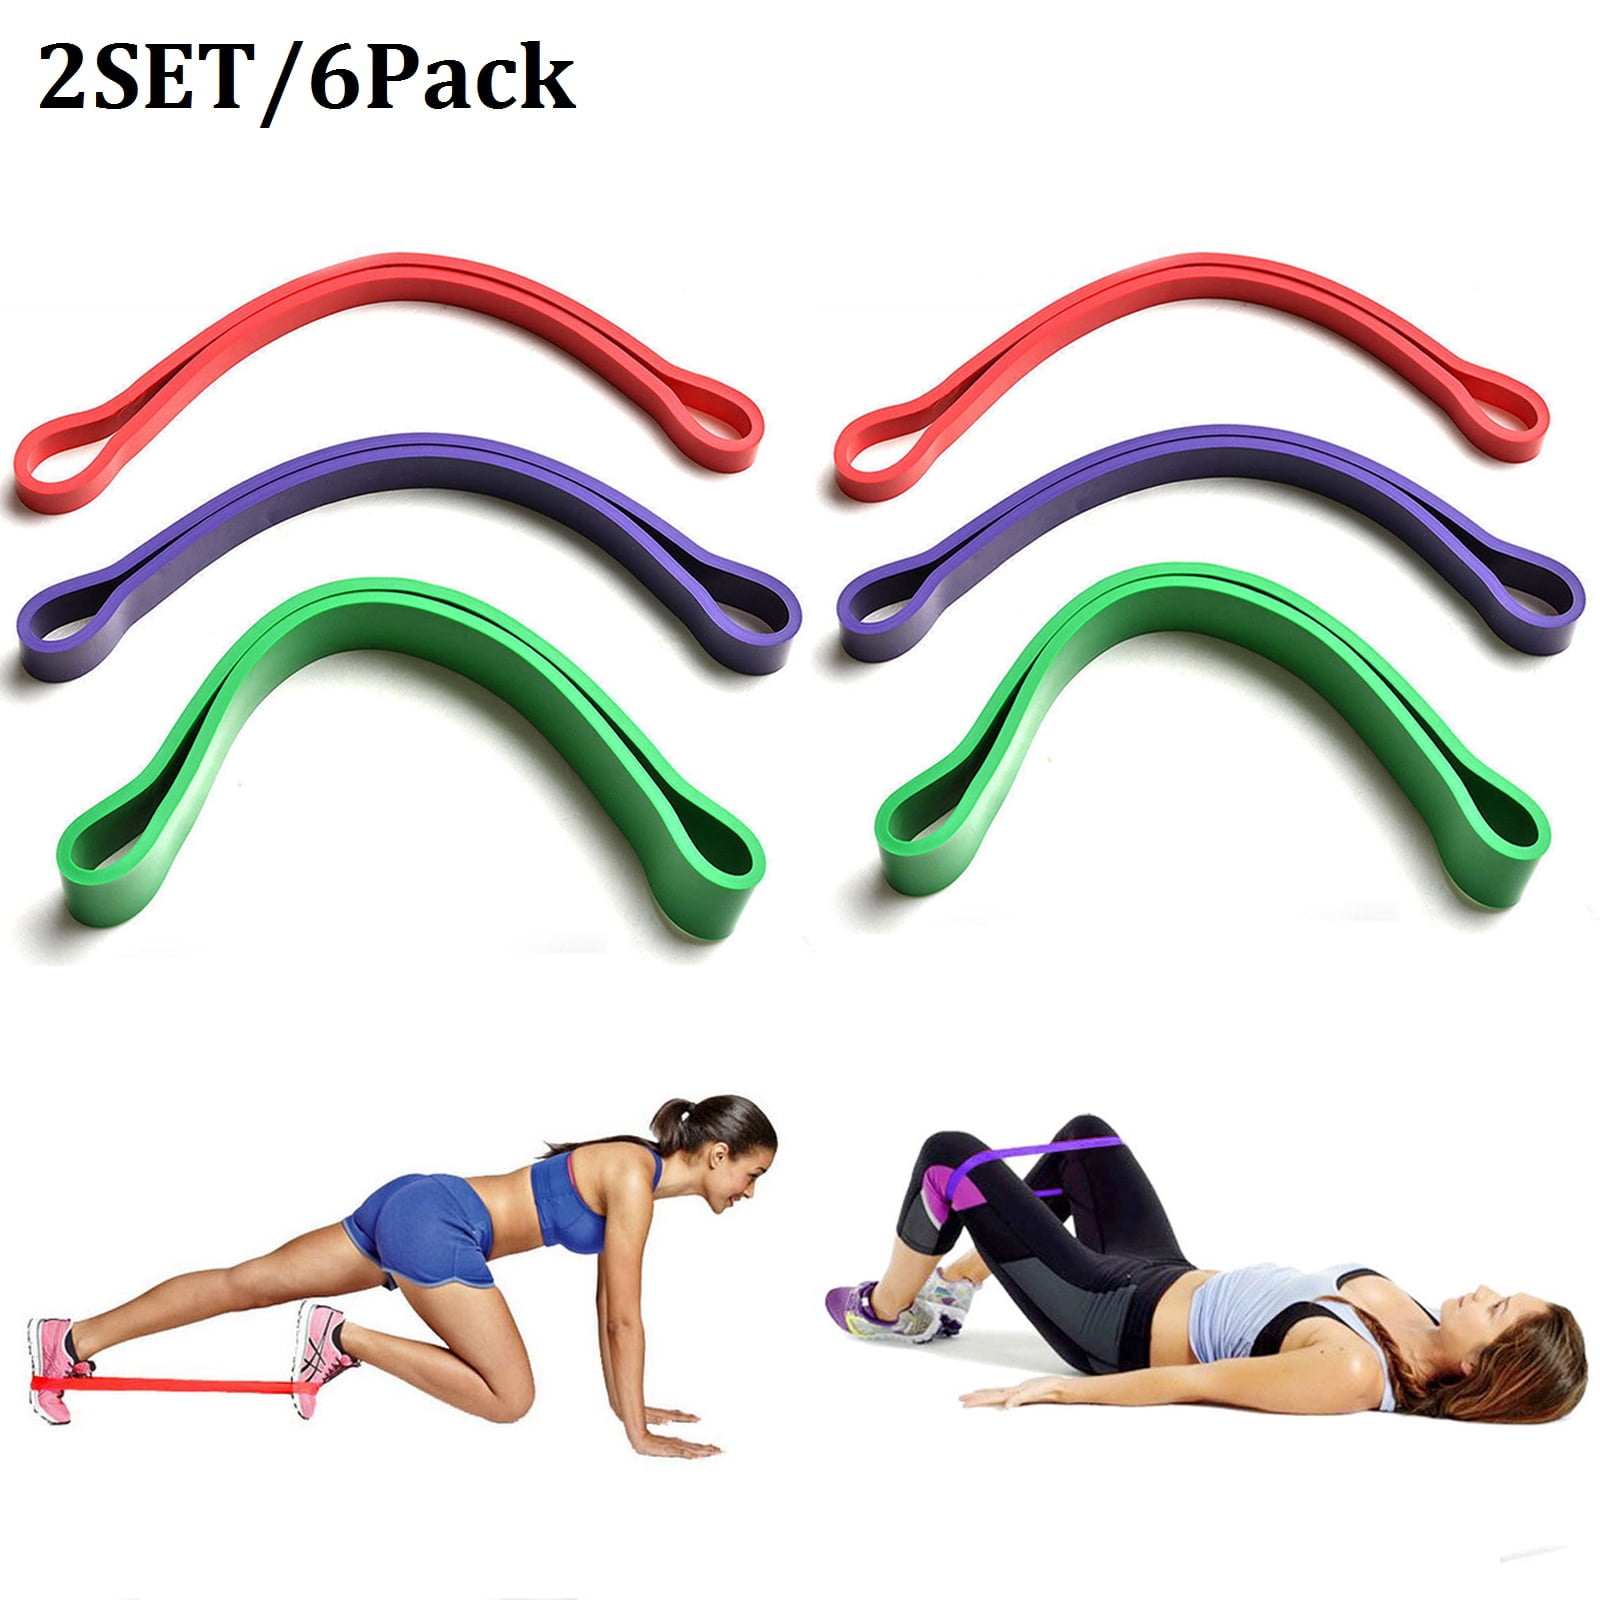 Zhongke Exercise Resistance Bands Set Yoga Strength Training Conditioning Fitness Body Band,Tension Stretch Band,Elastic Workout Band for Yoga Home Gym Strength Training 